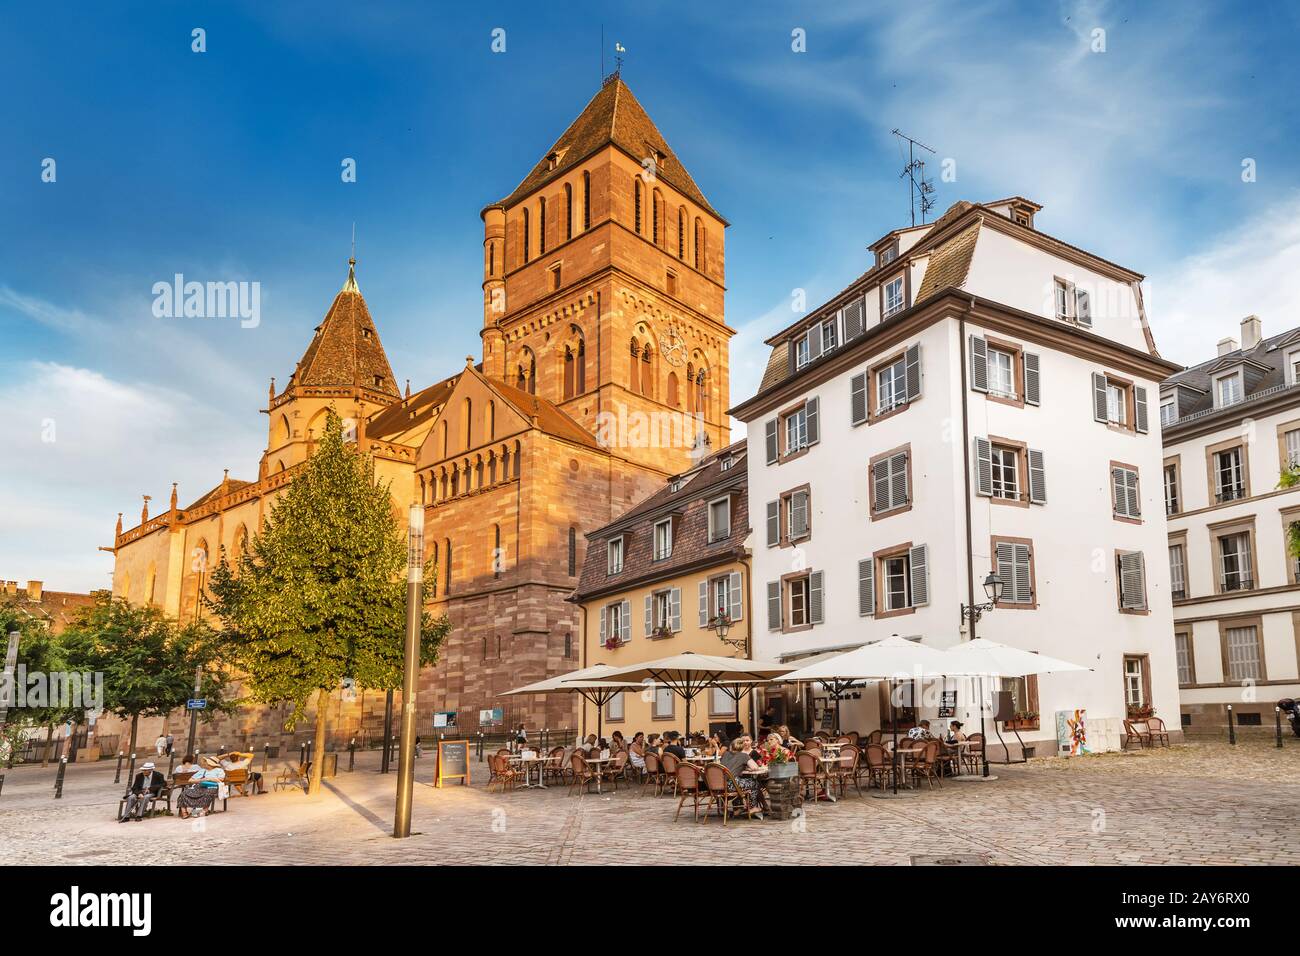 21 July 2019, Strasbourg, France: Saint Thomas church in Strasbourg and resting people at hot summer day Stock Photo